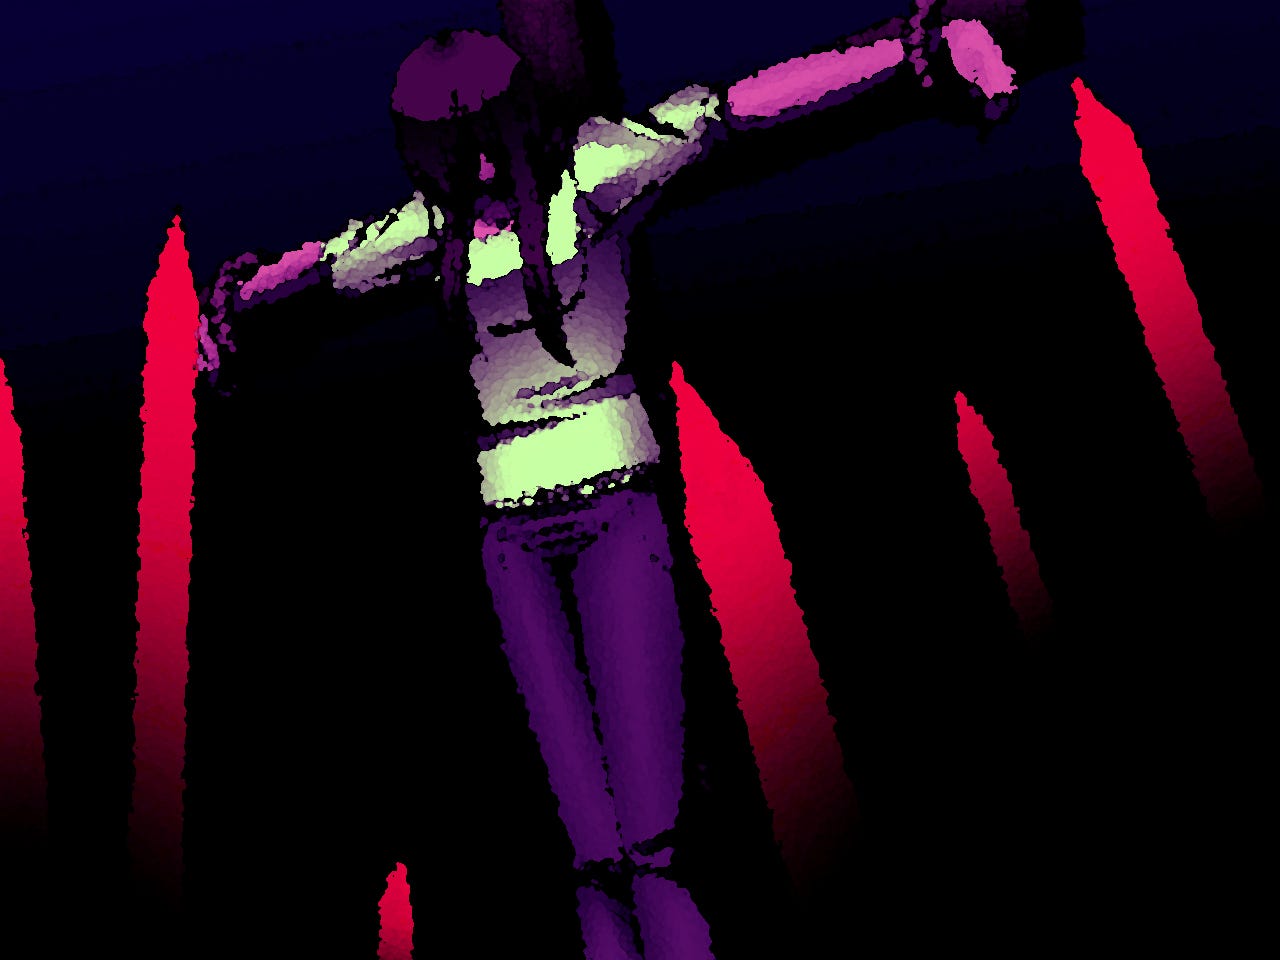 CG of a woman getting crucified with people holding up sharp red poles in front of her